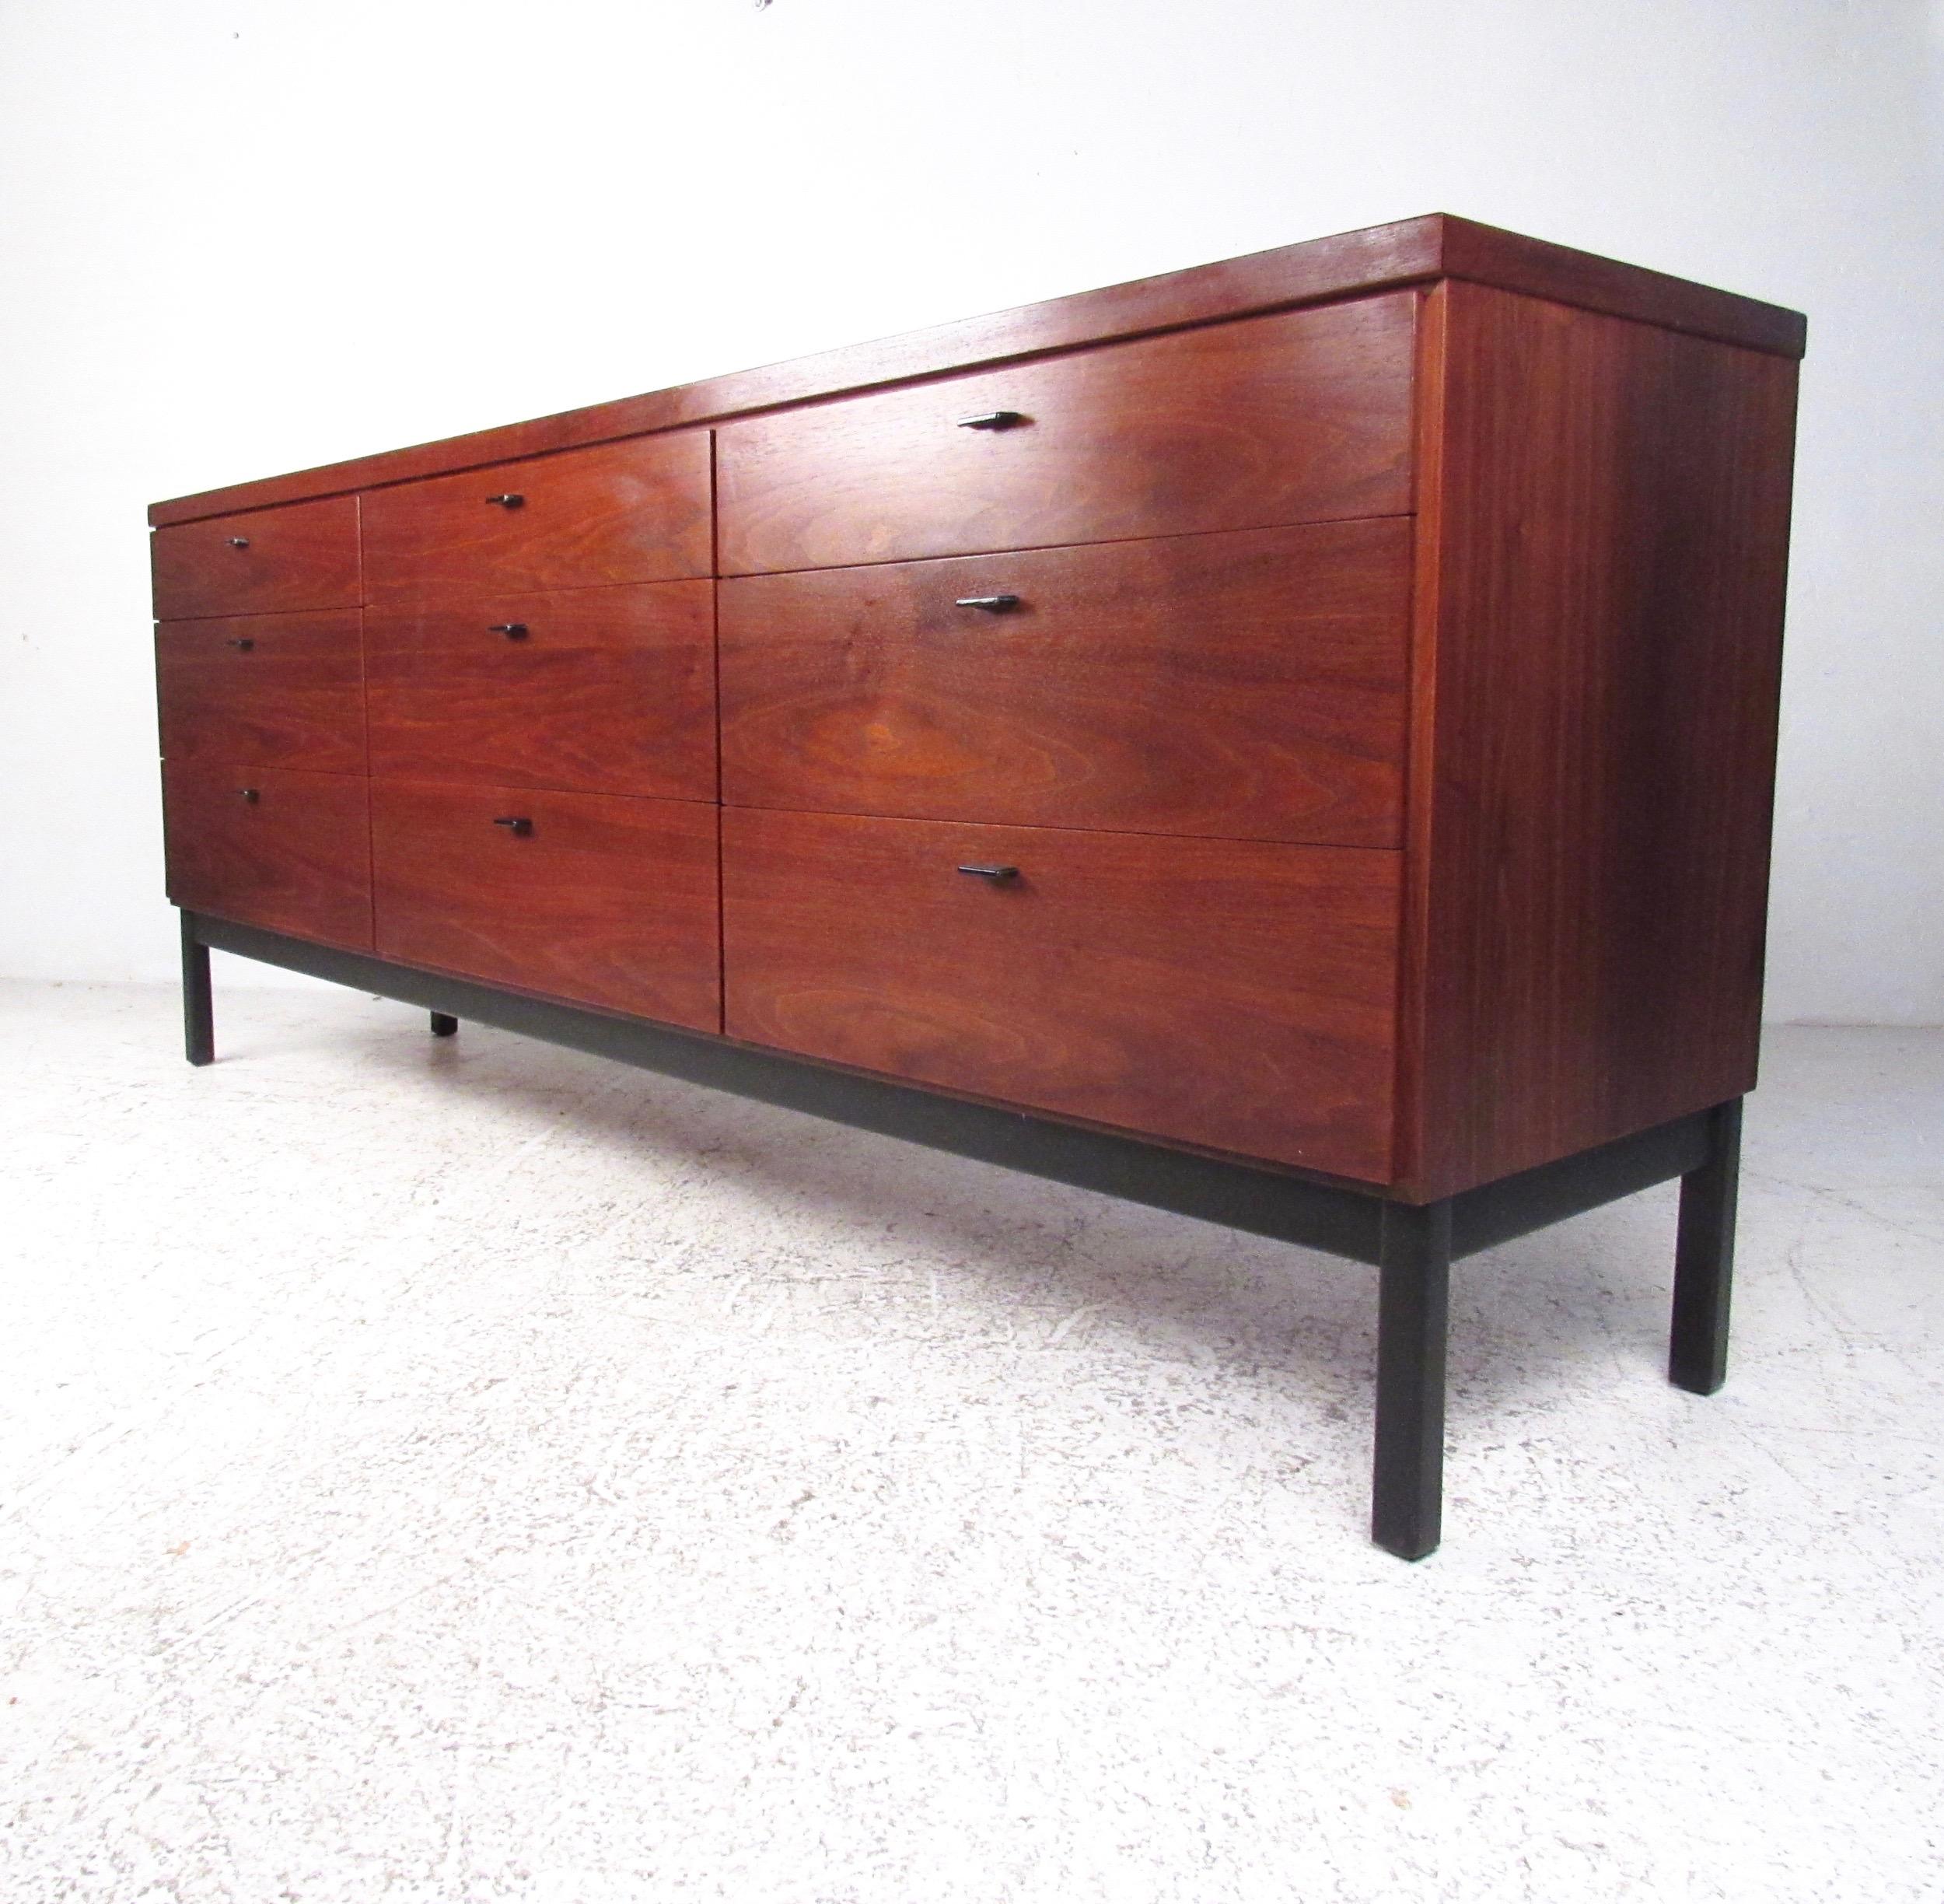 This beautiful Mid-Century Modern dresser features striking natural finish, dovetailed drawers, and unique Florence Knoll style drawer pulls. Nine spacious drawers offer plenty of storage for bedroom storage, although the impeccable vintage walnut